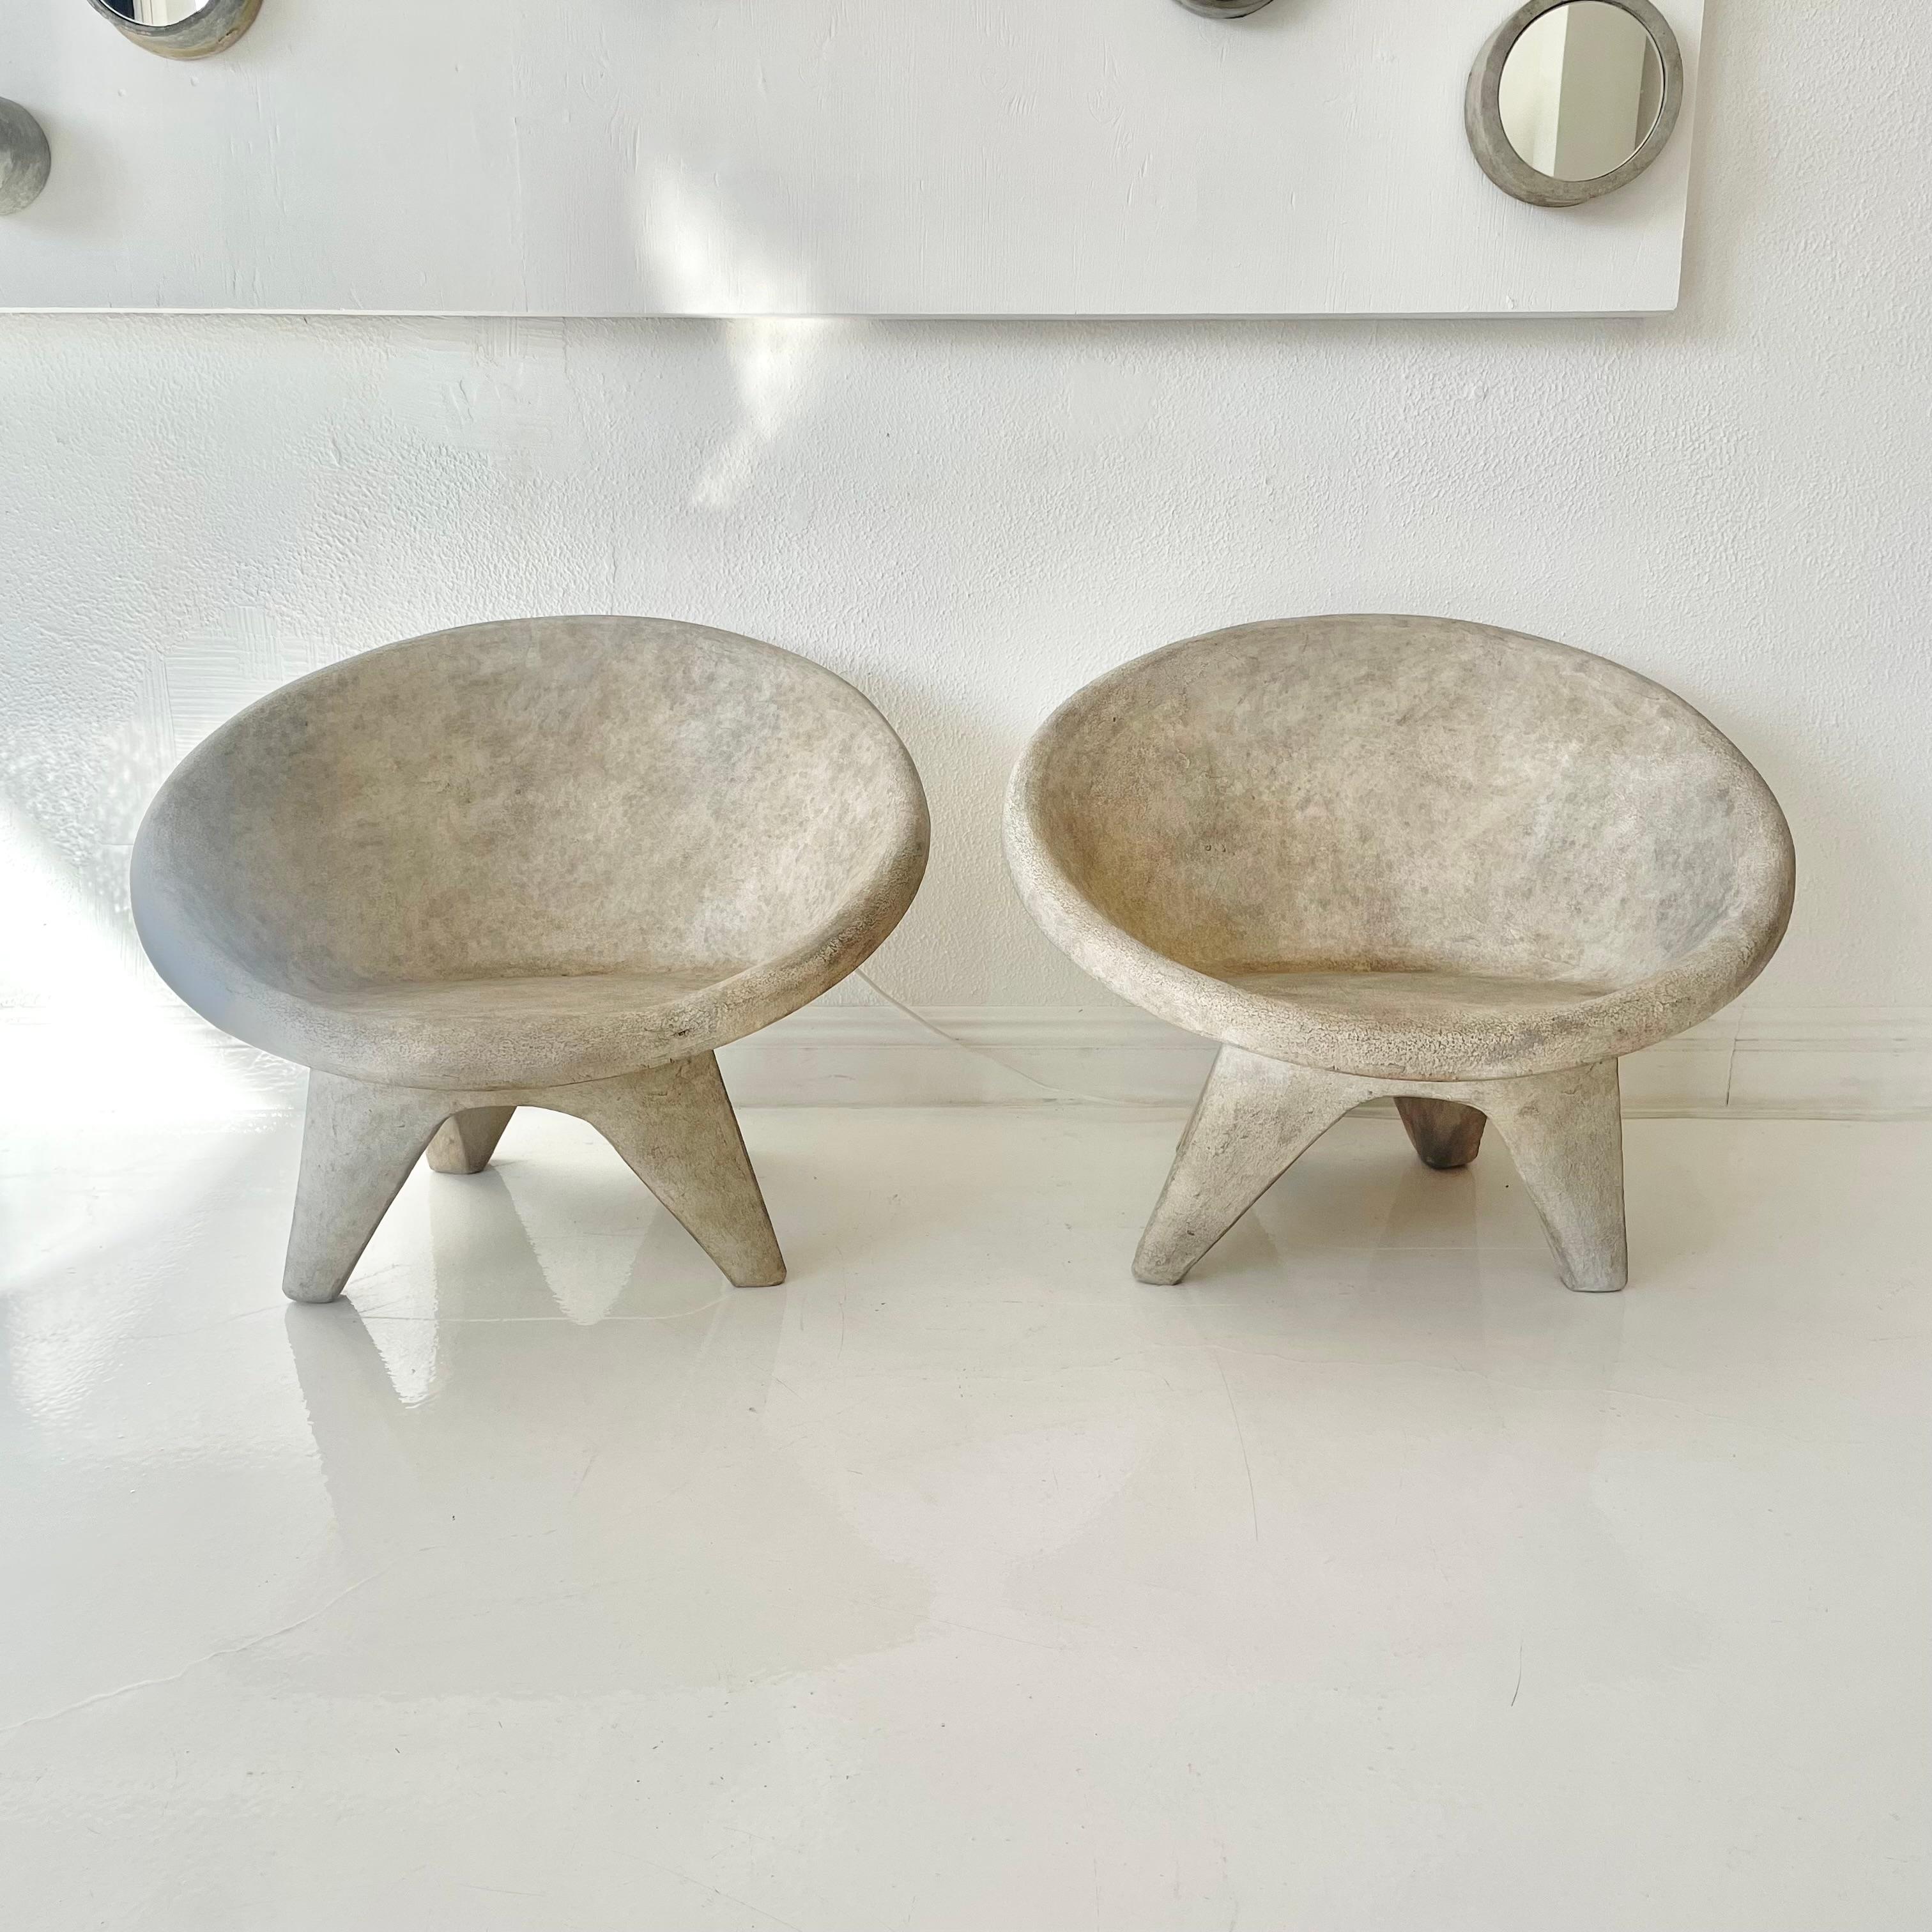 Stunning pair of outdoor chairs made of solid concrete and each with a perfect and unique patina. Round saucer seat with angular legs. Incredible modern design perfect for any outdoor space. Factory drilled hole in the seat of each chair for water